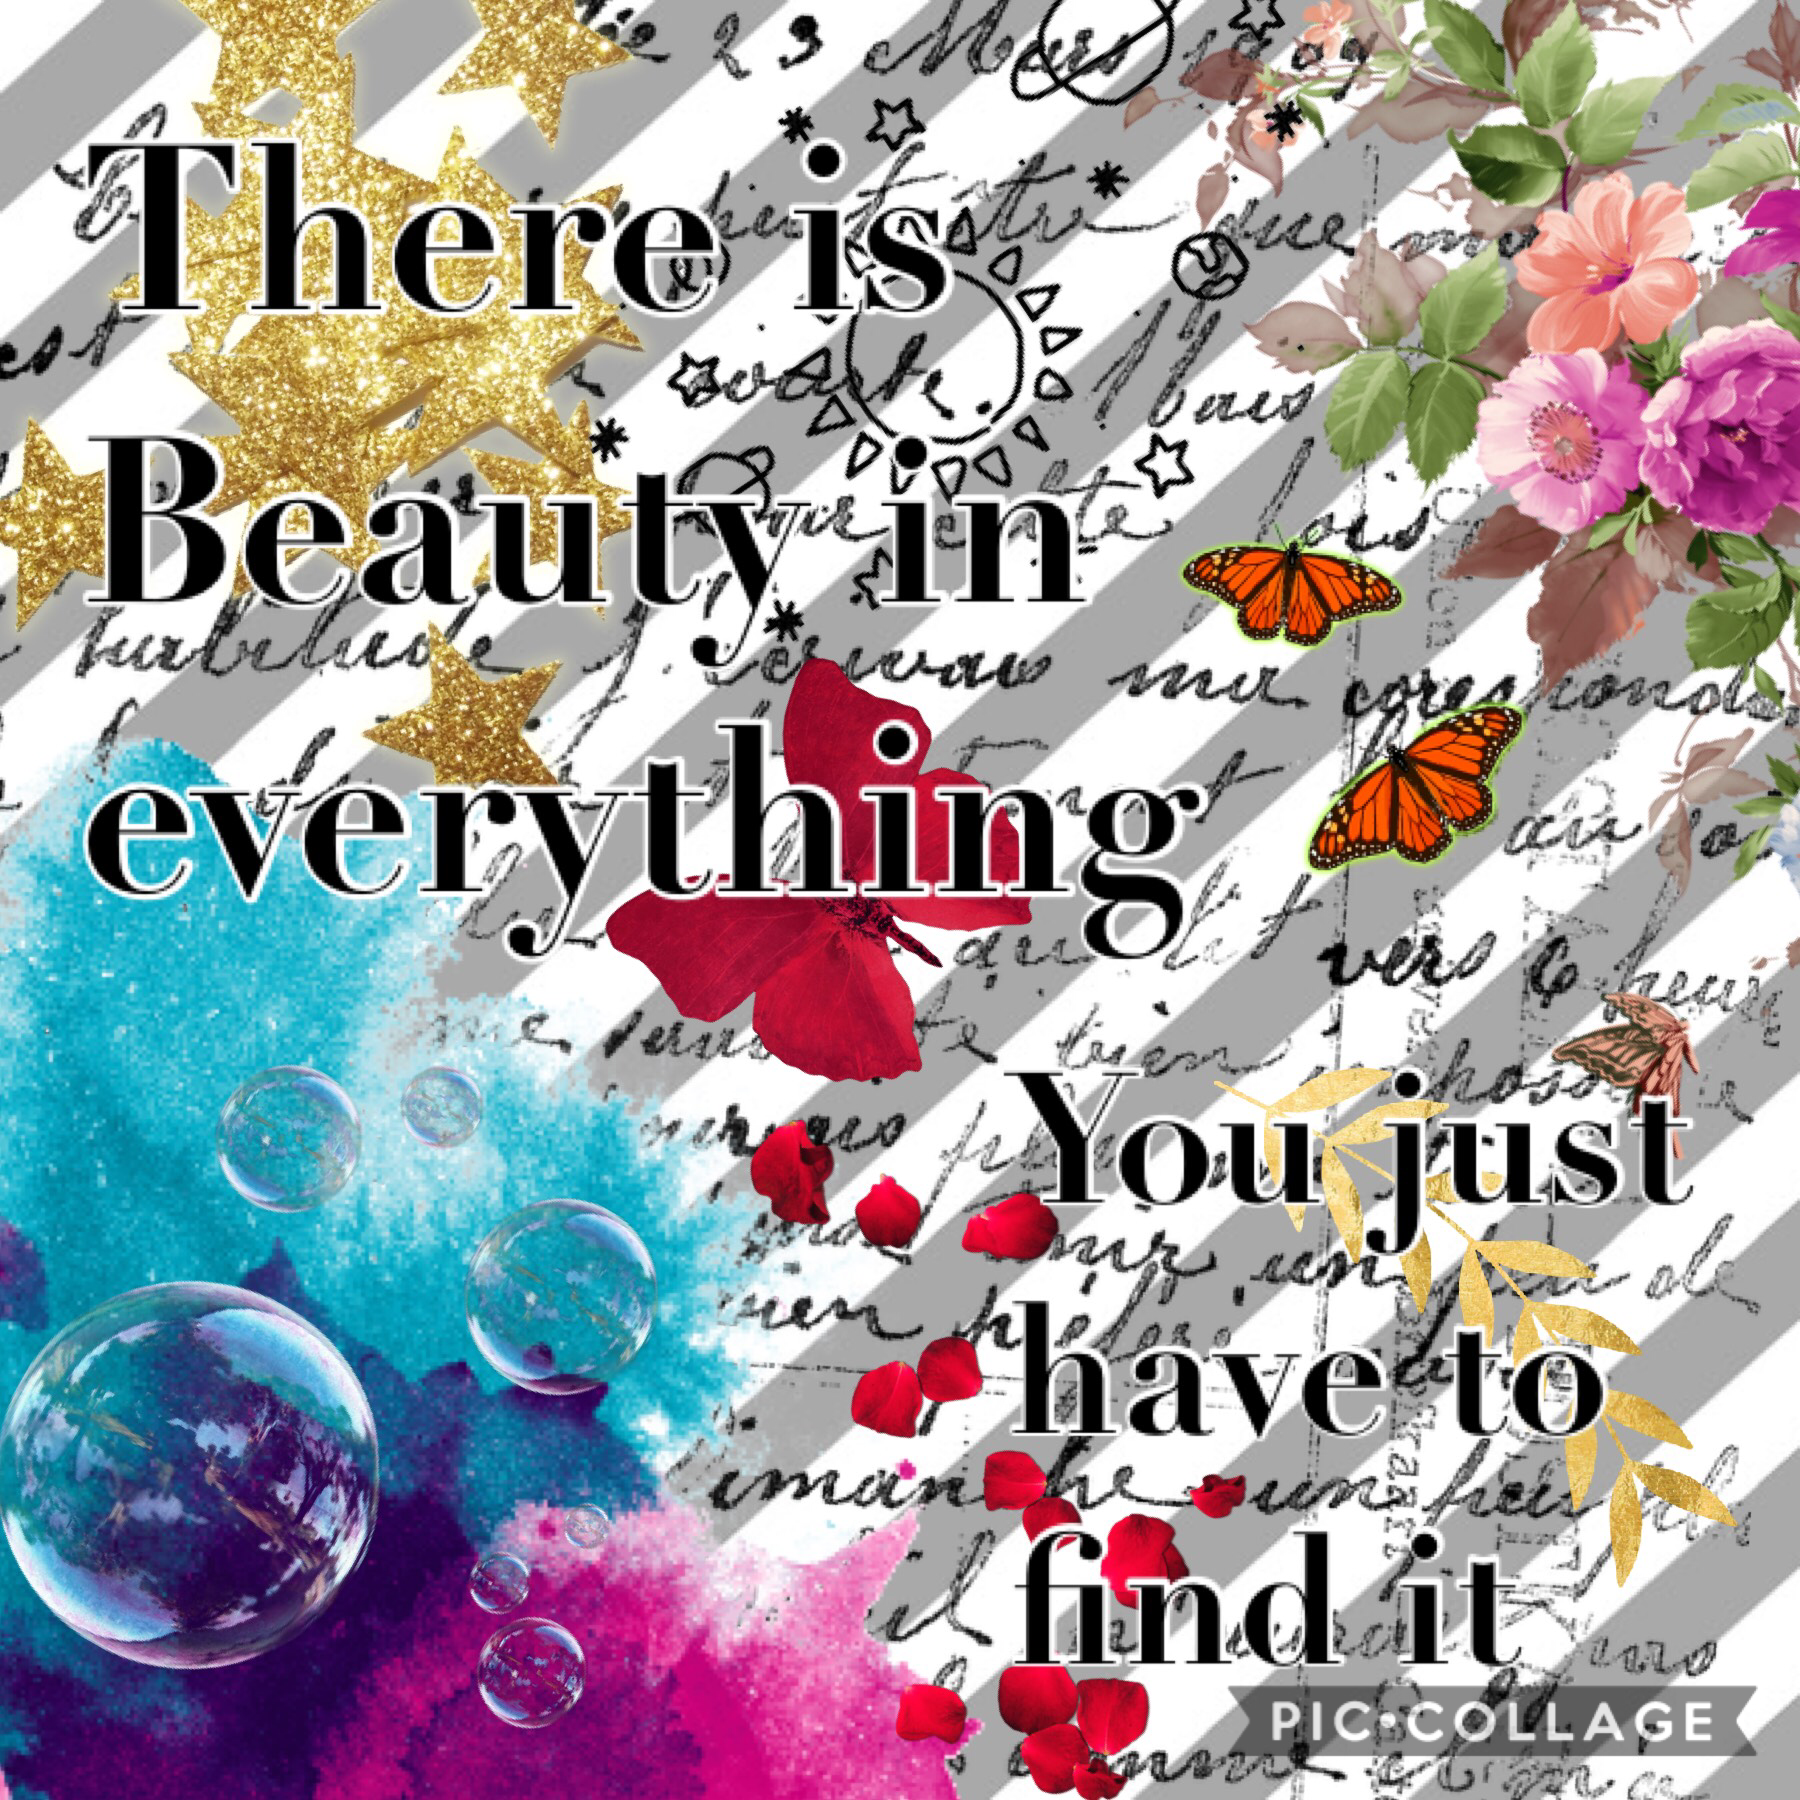 There is beauty in everything
You just have to find it